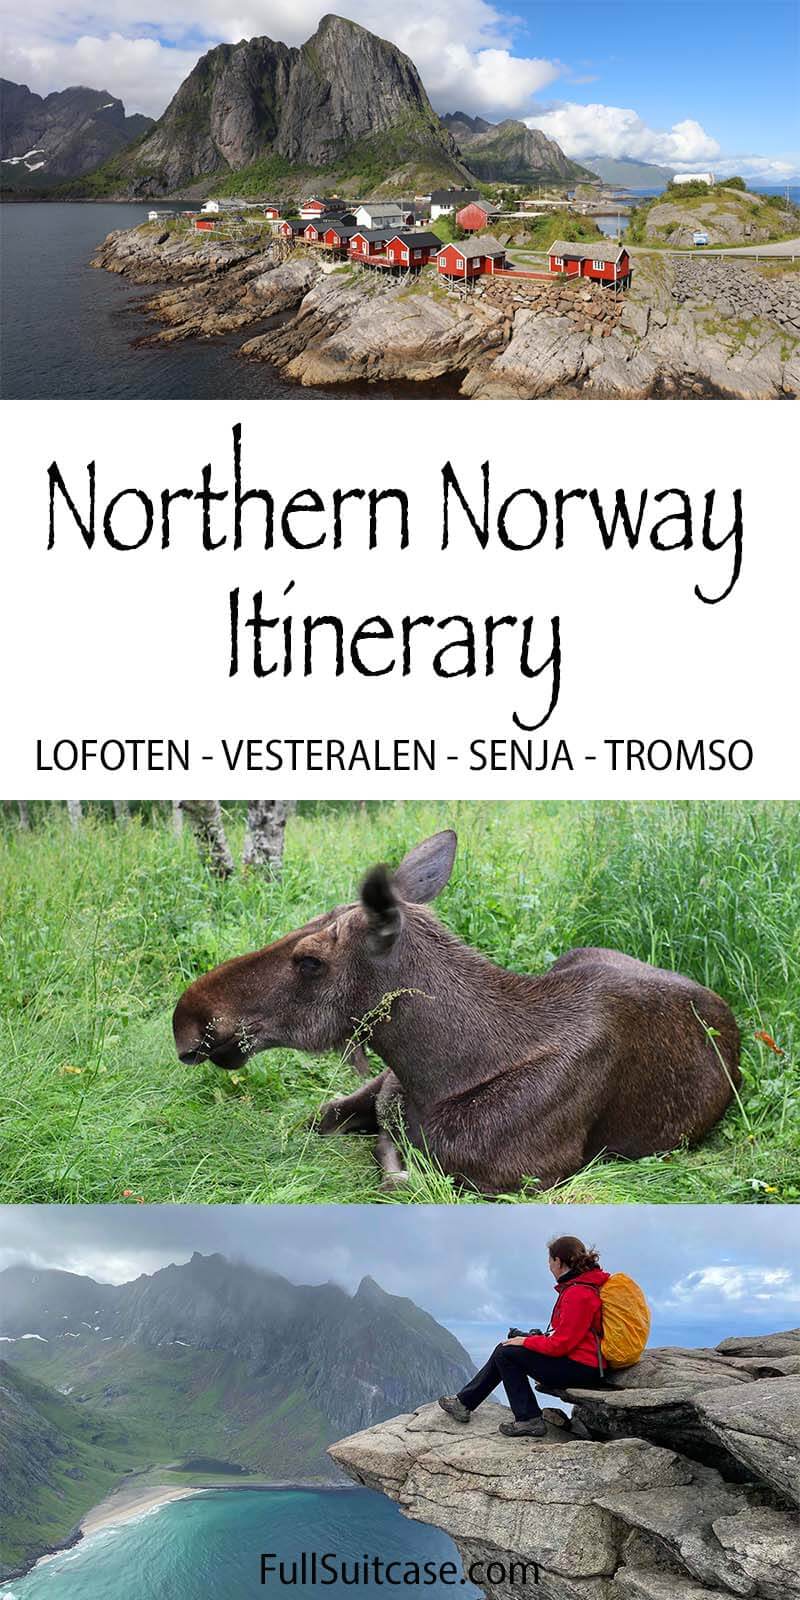 Northern Norway trip itinerary for two weeks visiting Lofoten Islands, Vesteralen, Senja, and Tromso